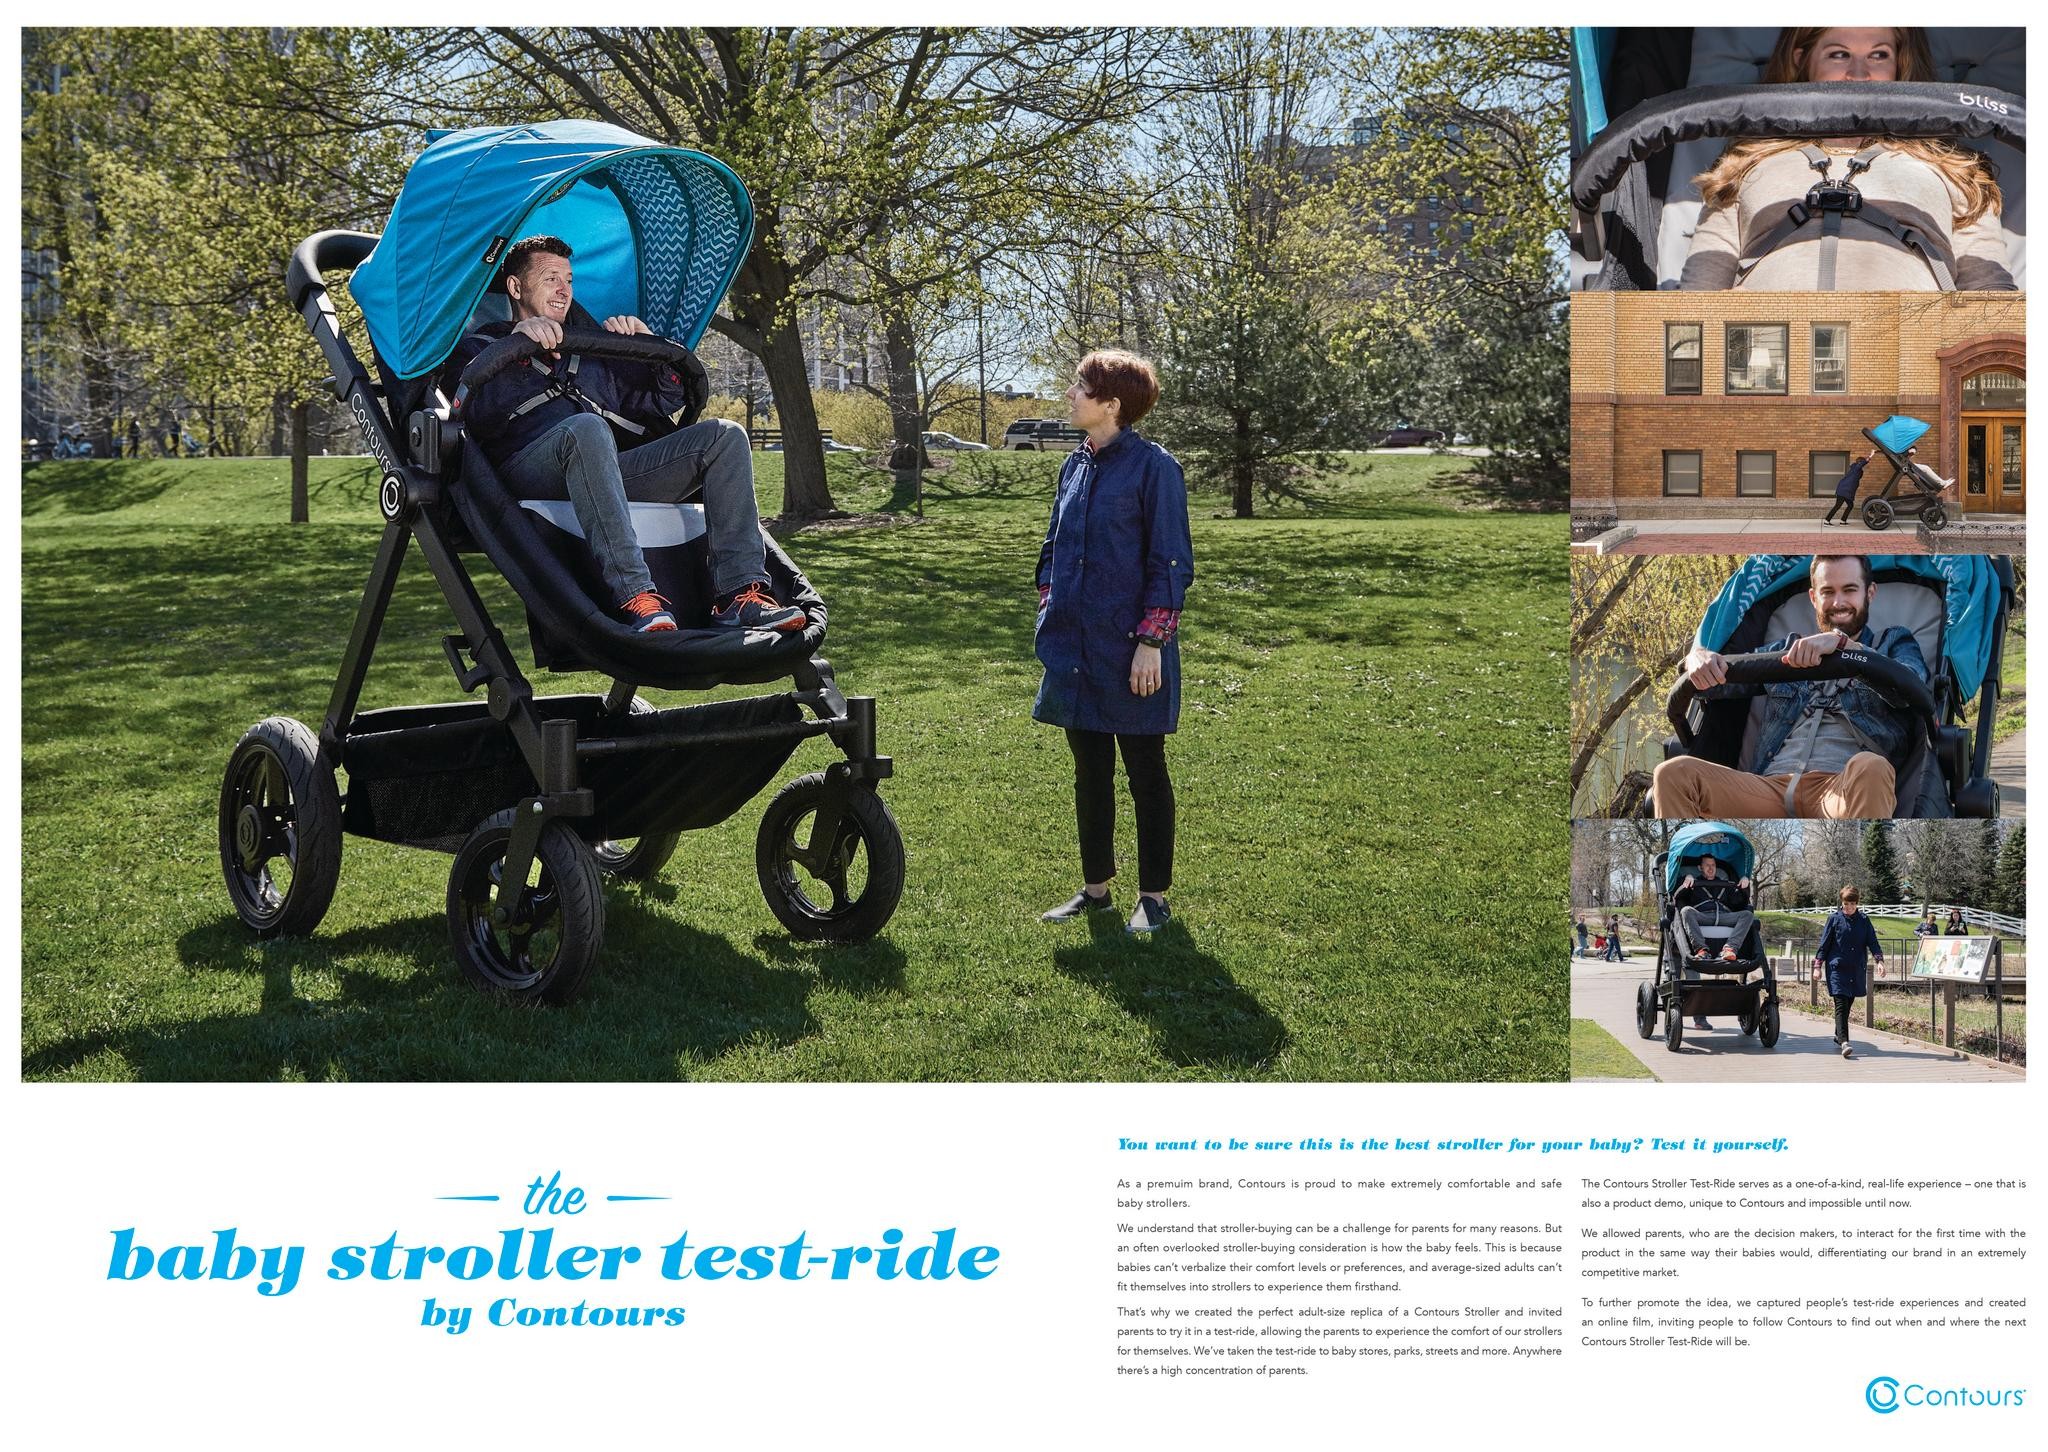 THE BABY STROLLER TEST-RIDE BY CONTOURS